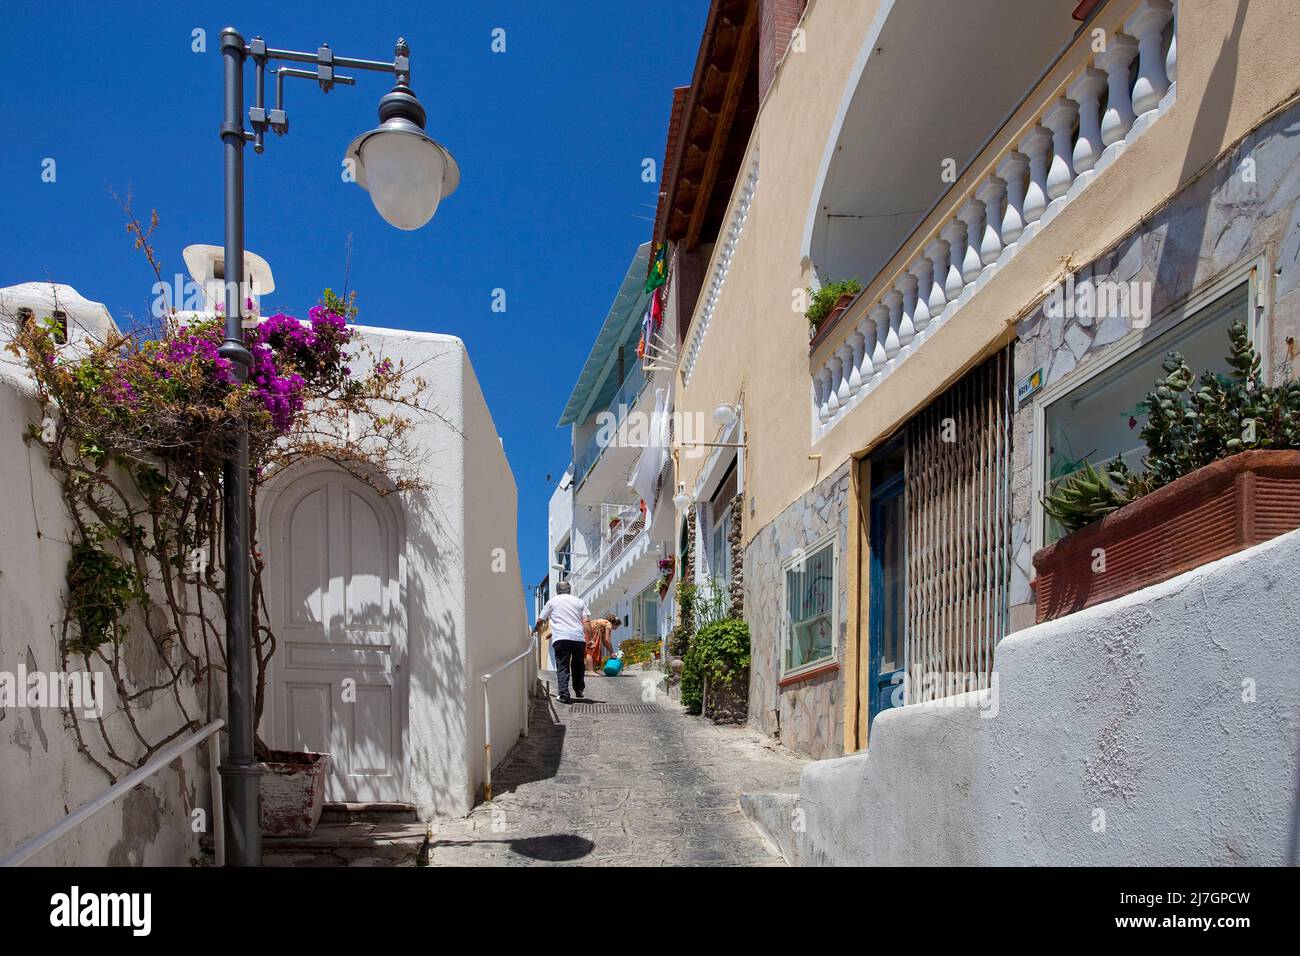 Alley in the picturesque fishing village Sant' Angelo, Ischia island, Gulf of Neapel, Italy, Mediterranean Sea, Europe Stock Photo